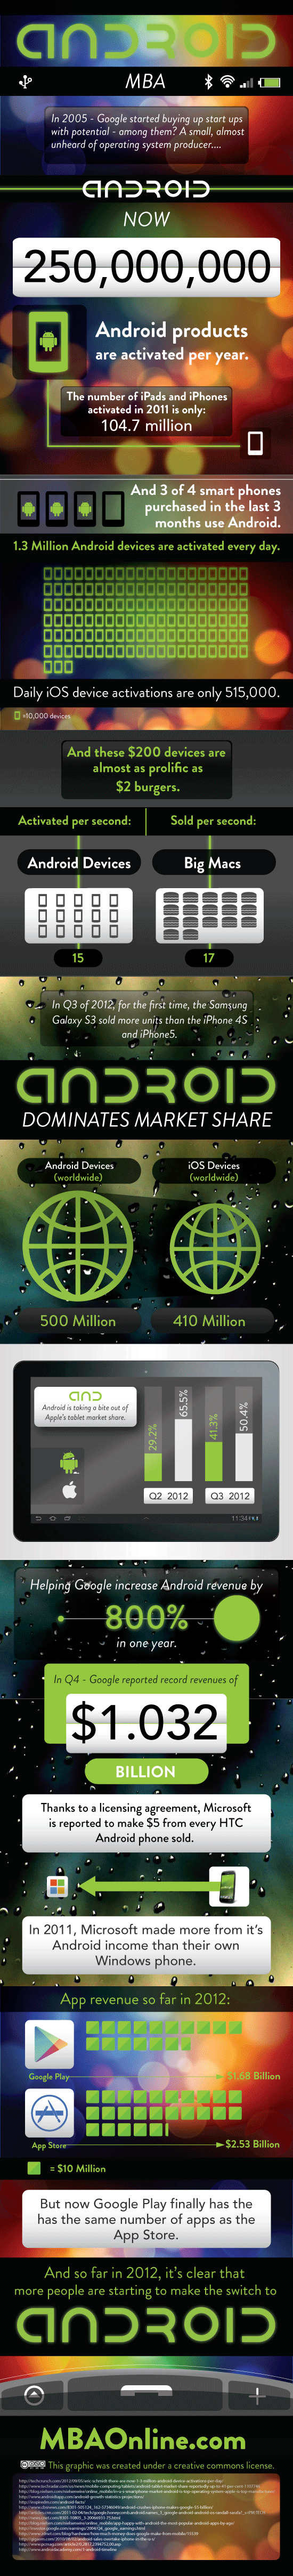 Android versus Apple iOS infographic 2012 market share compared